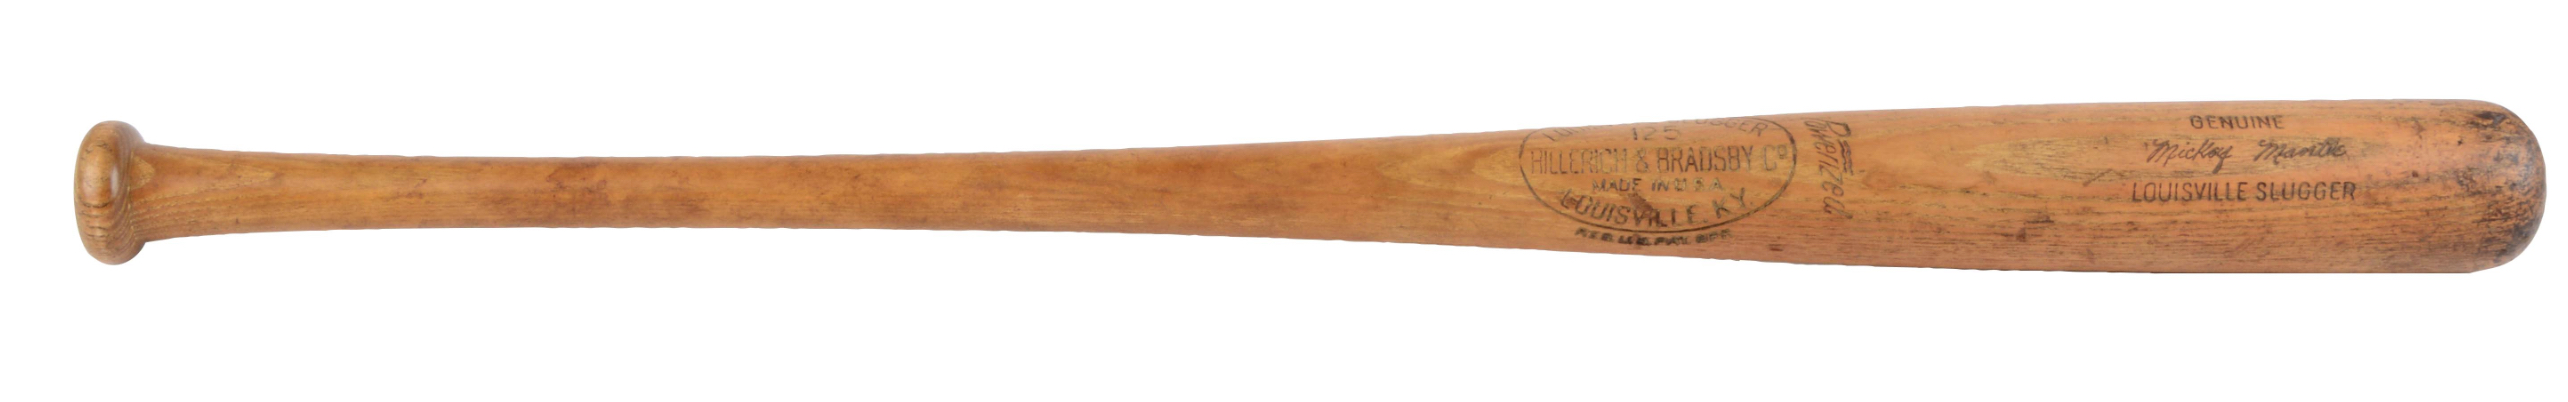 1960 Mickey Mantle Game Used H&B Bat, estimated at $15,000-25,000.